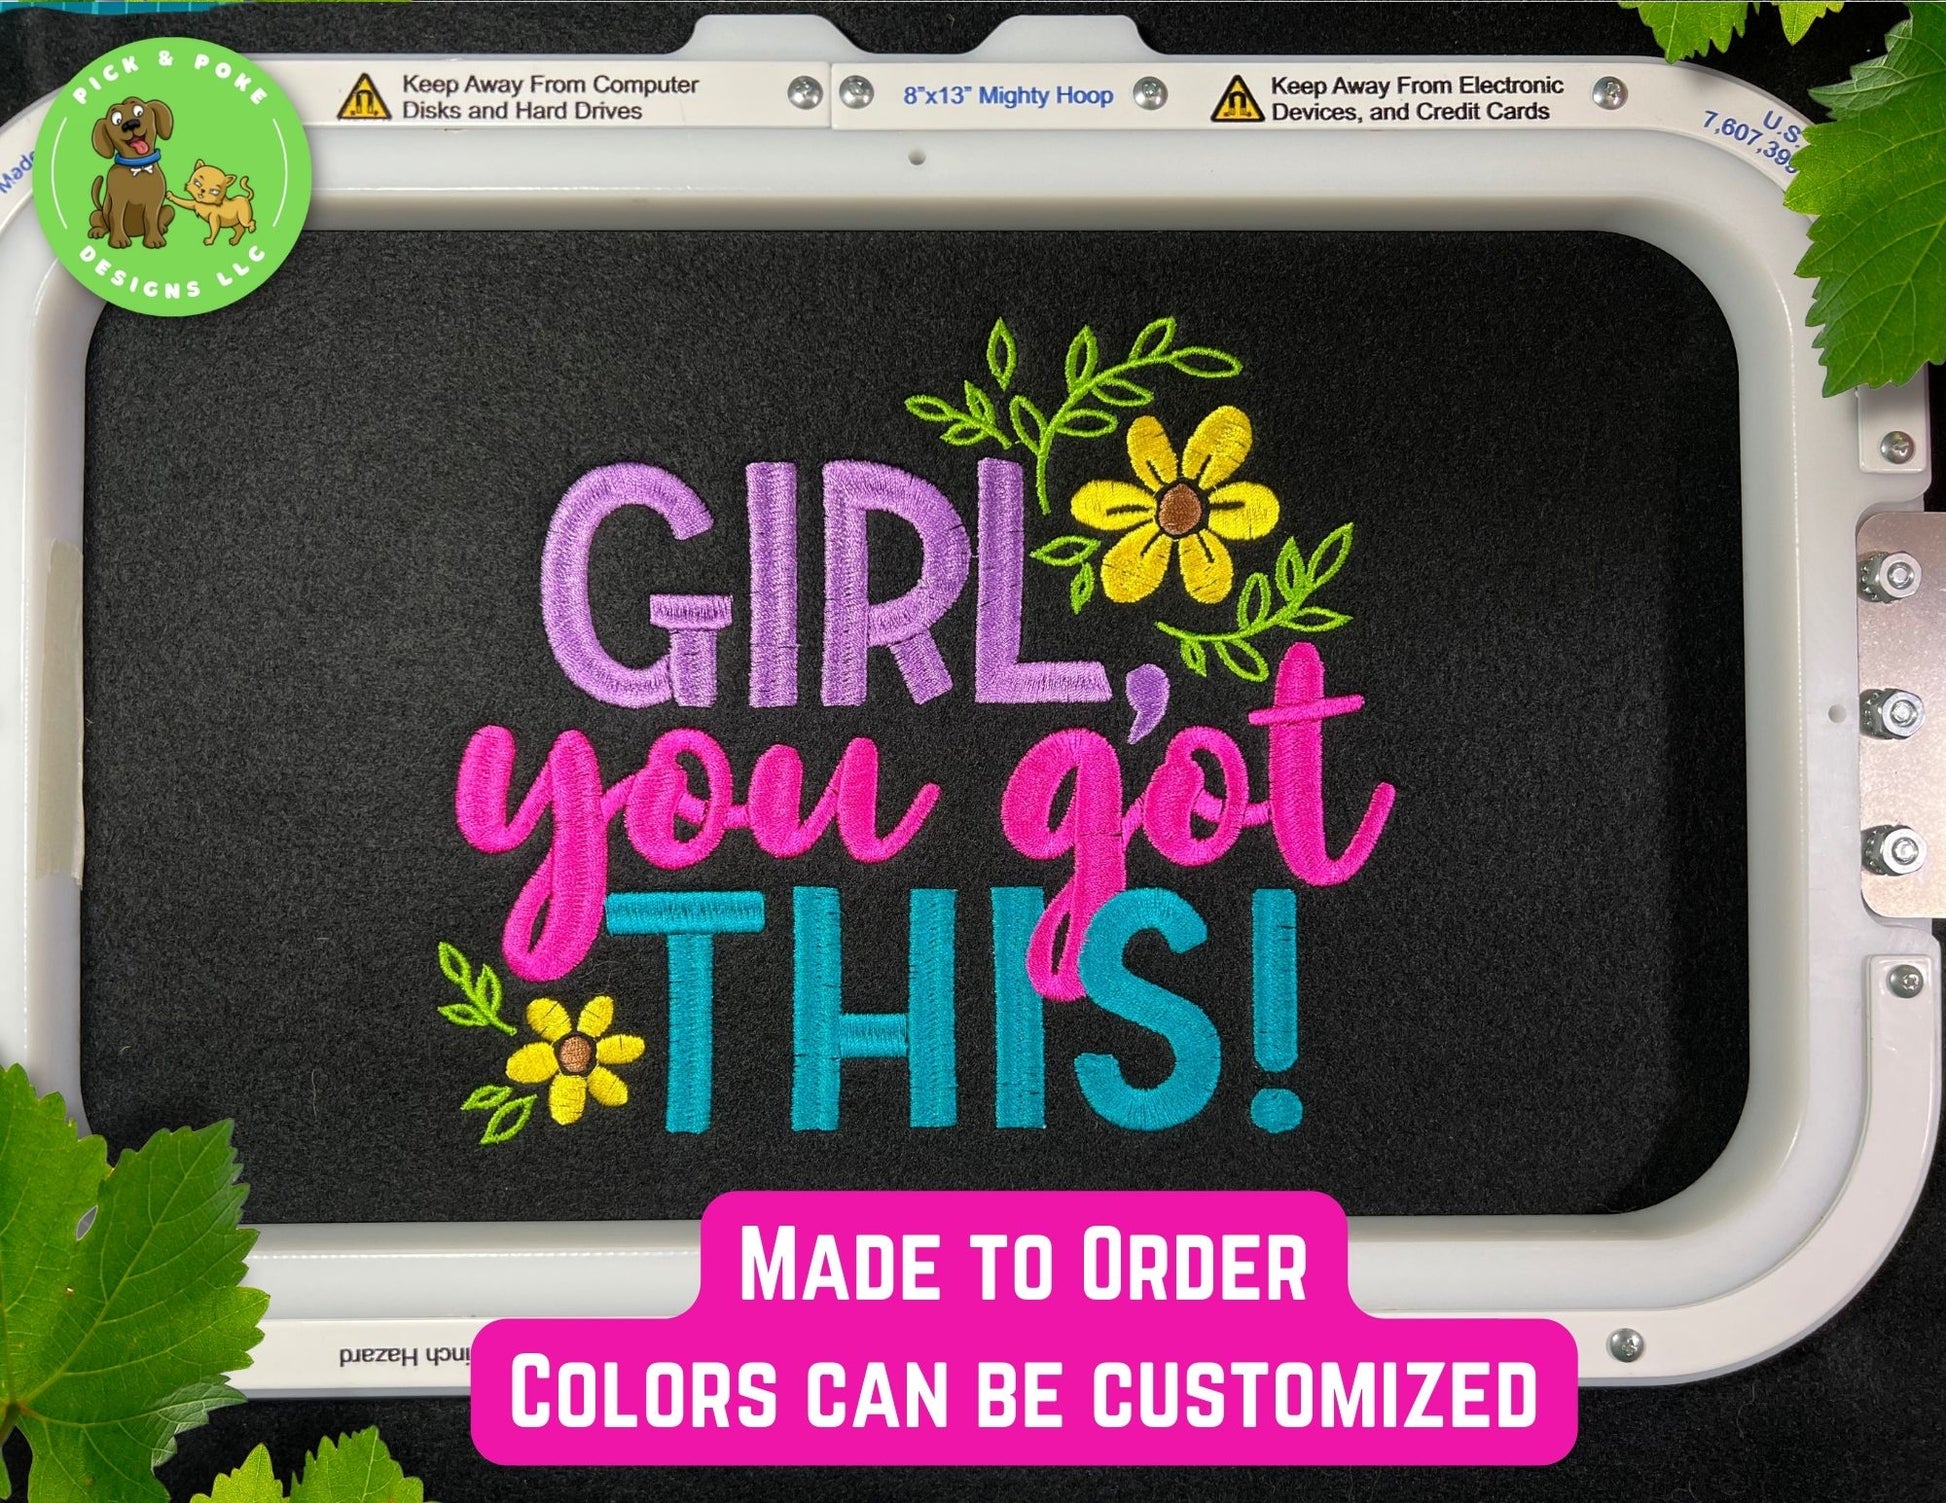 Each "Girl, you got this" sweatshirt is made to order so the colors can be customized.